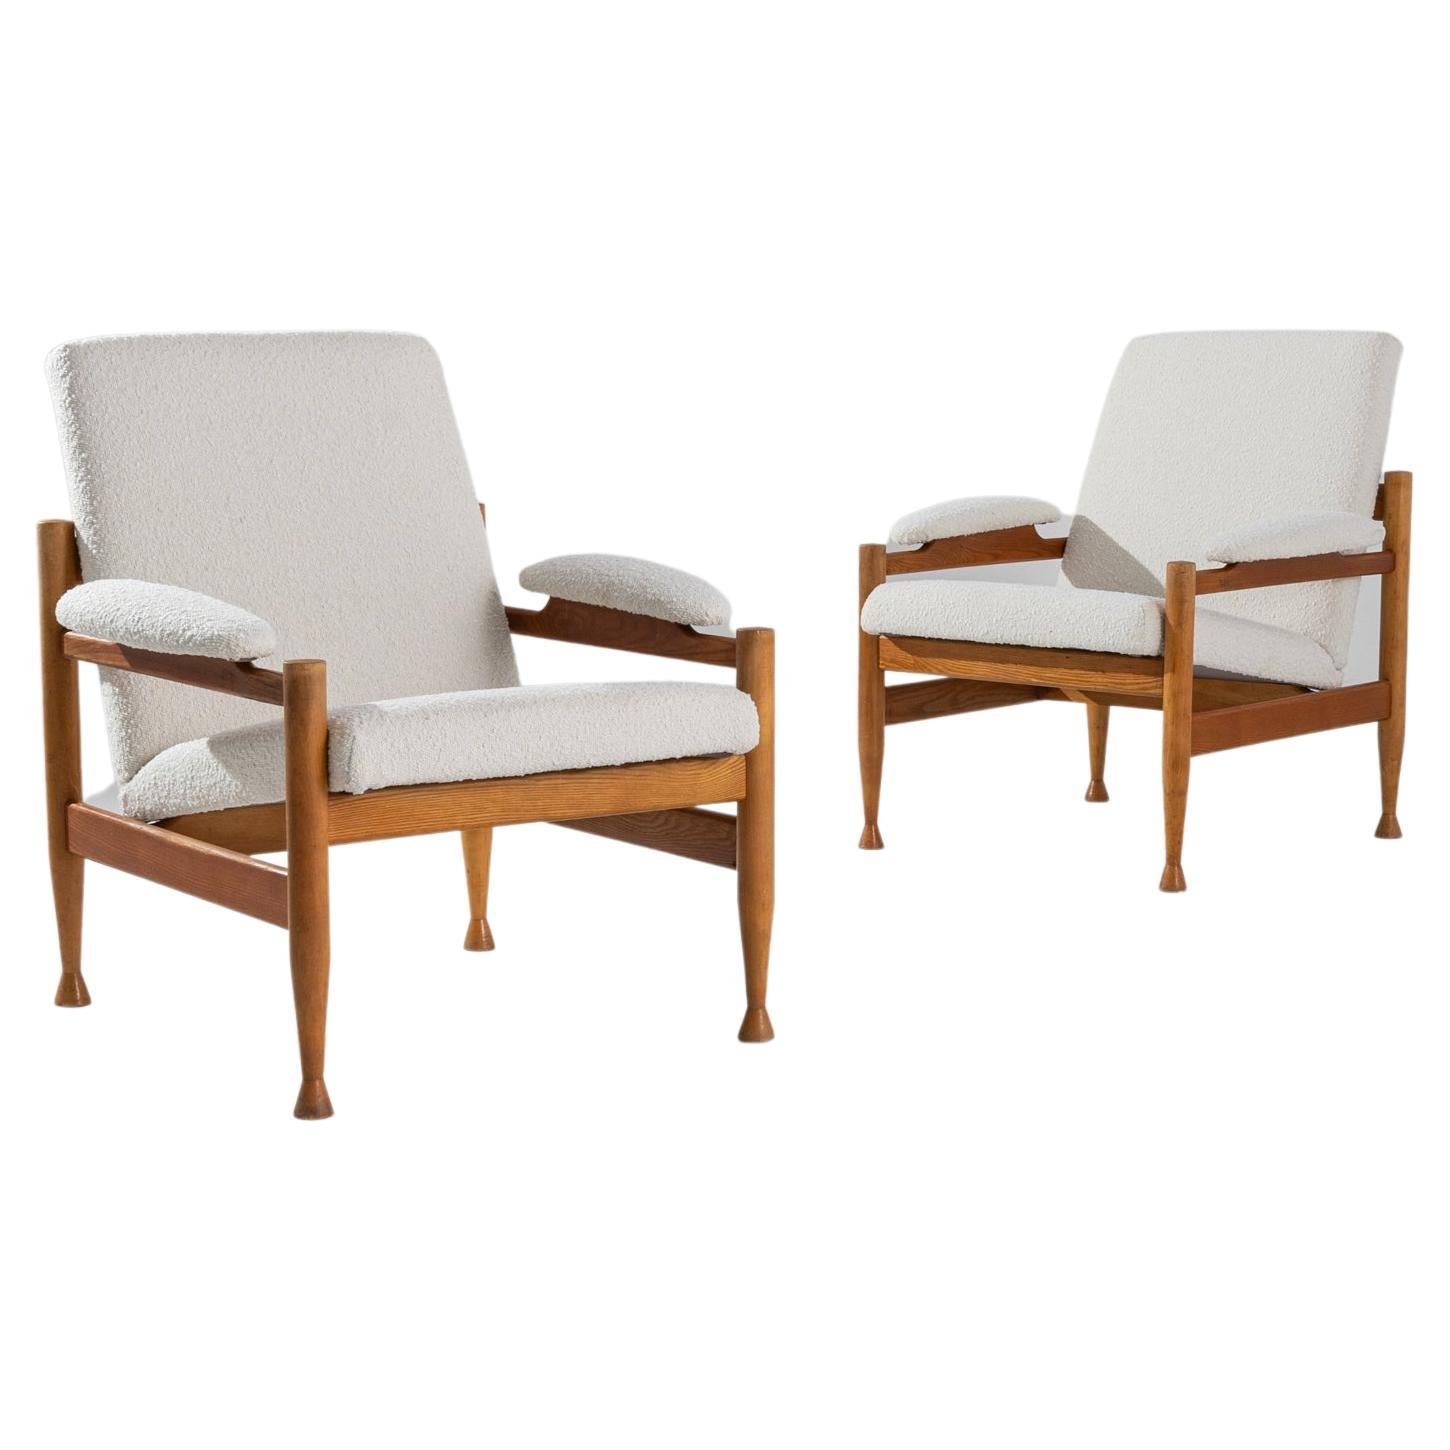 20th Century Danish Wooden Upholstered Armchairs, a Pair